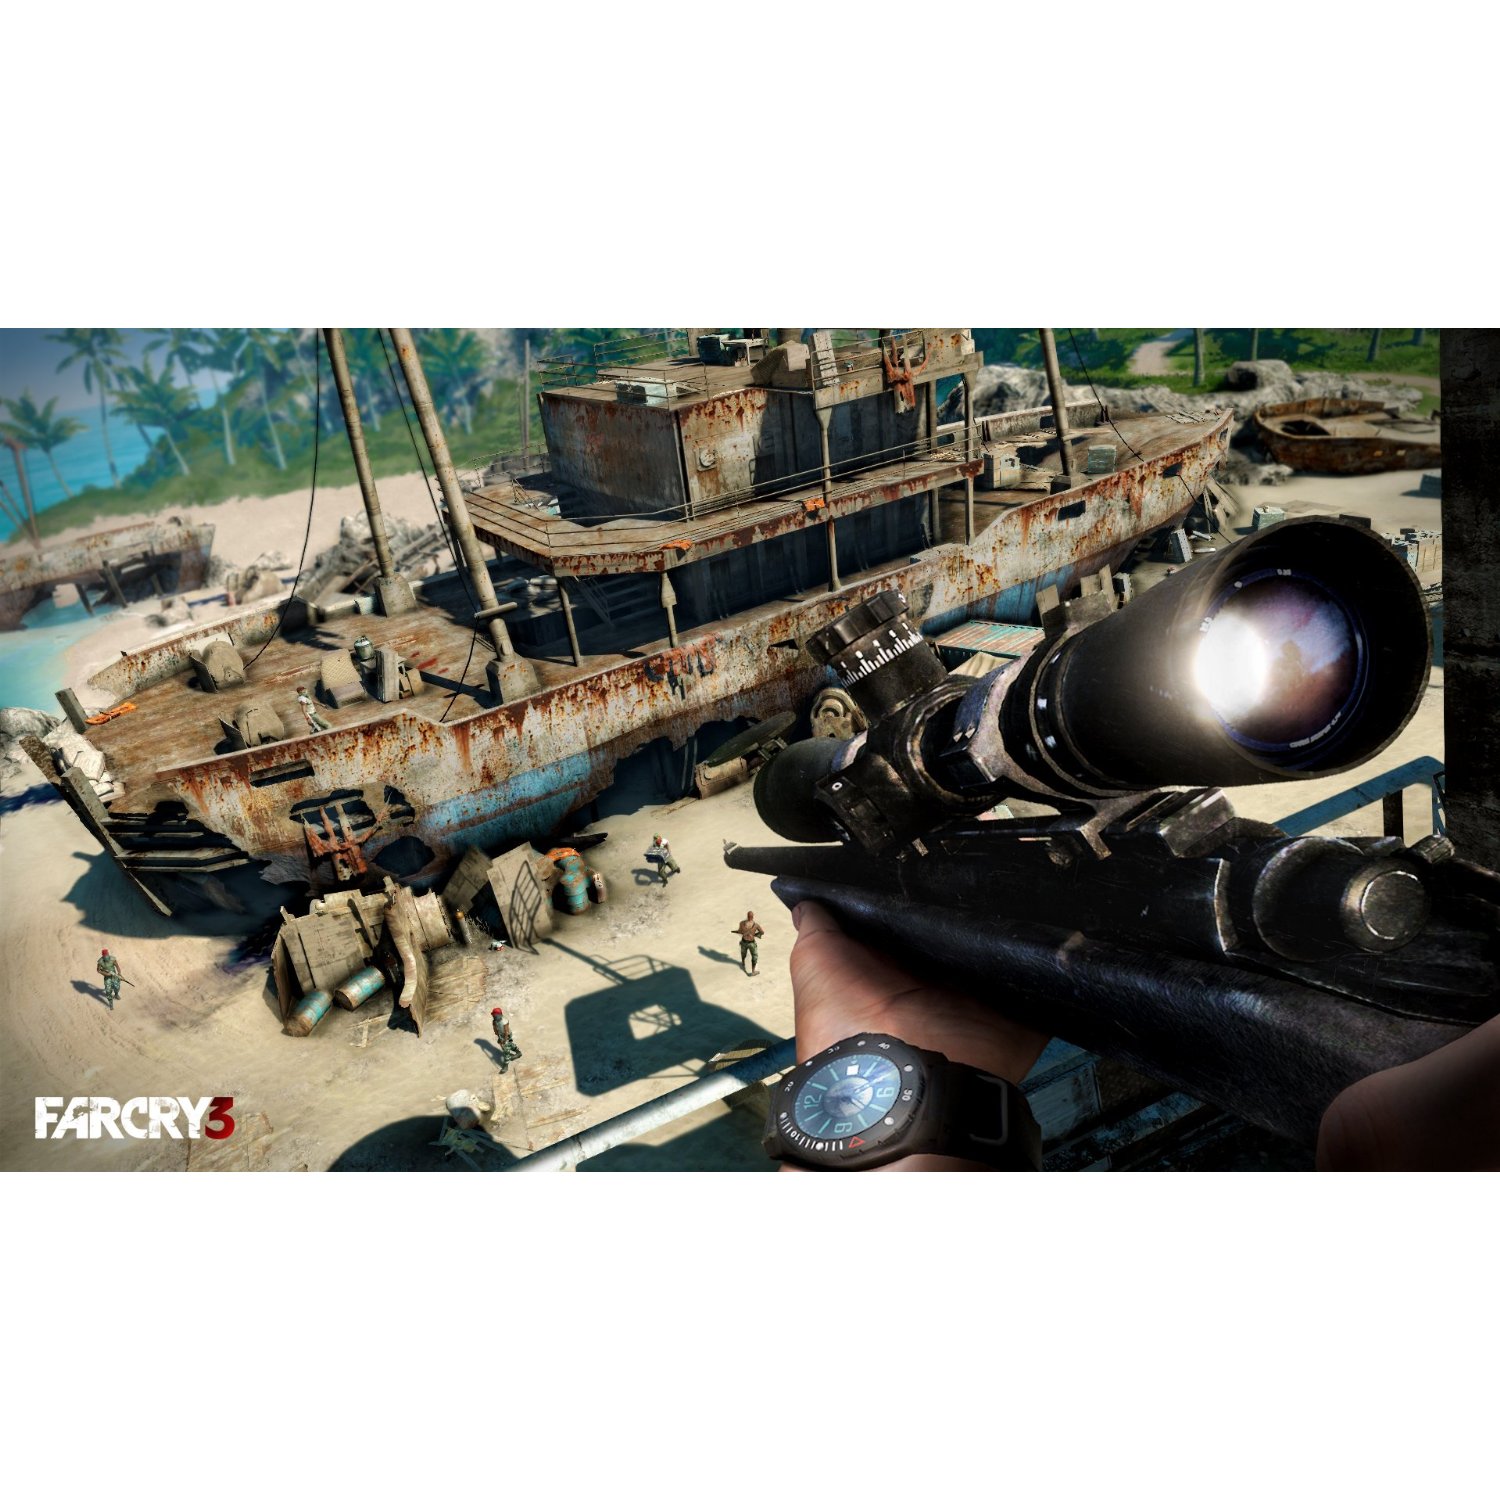 http://thetechjournal.com/wp-content/uploads/images/1203/1332755430-far-cry-3--game-for-pc-3.jpg